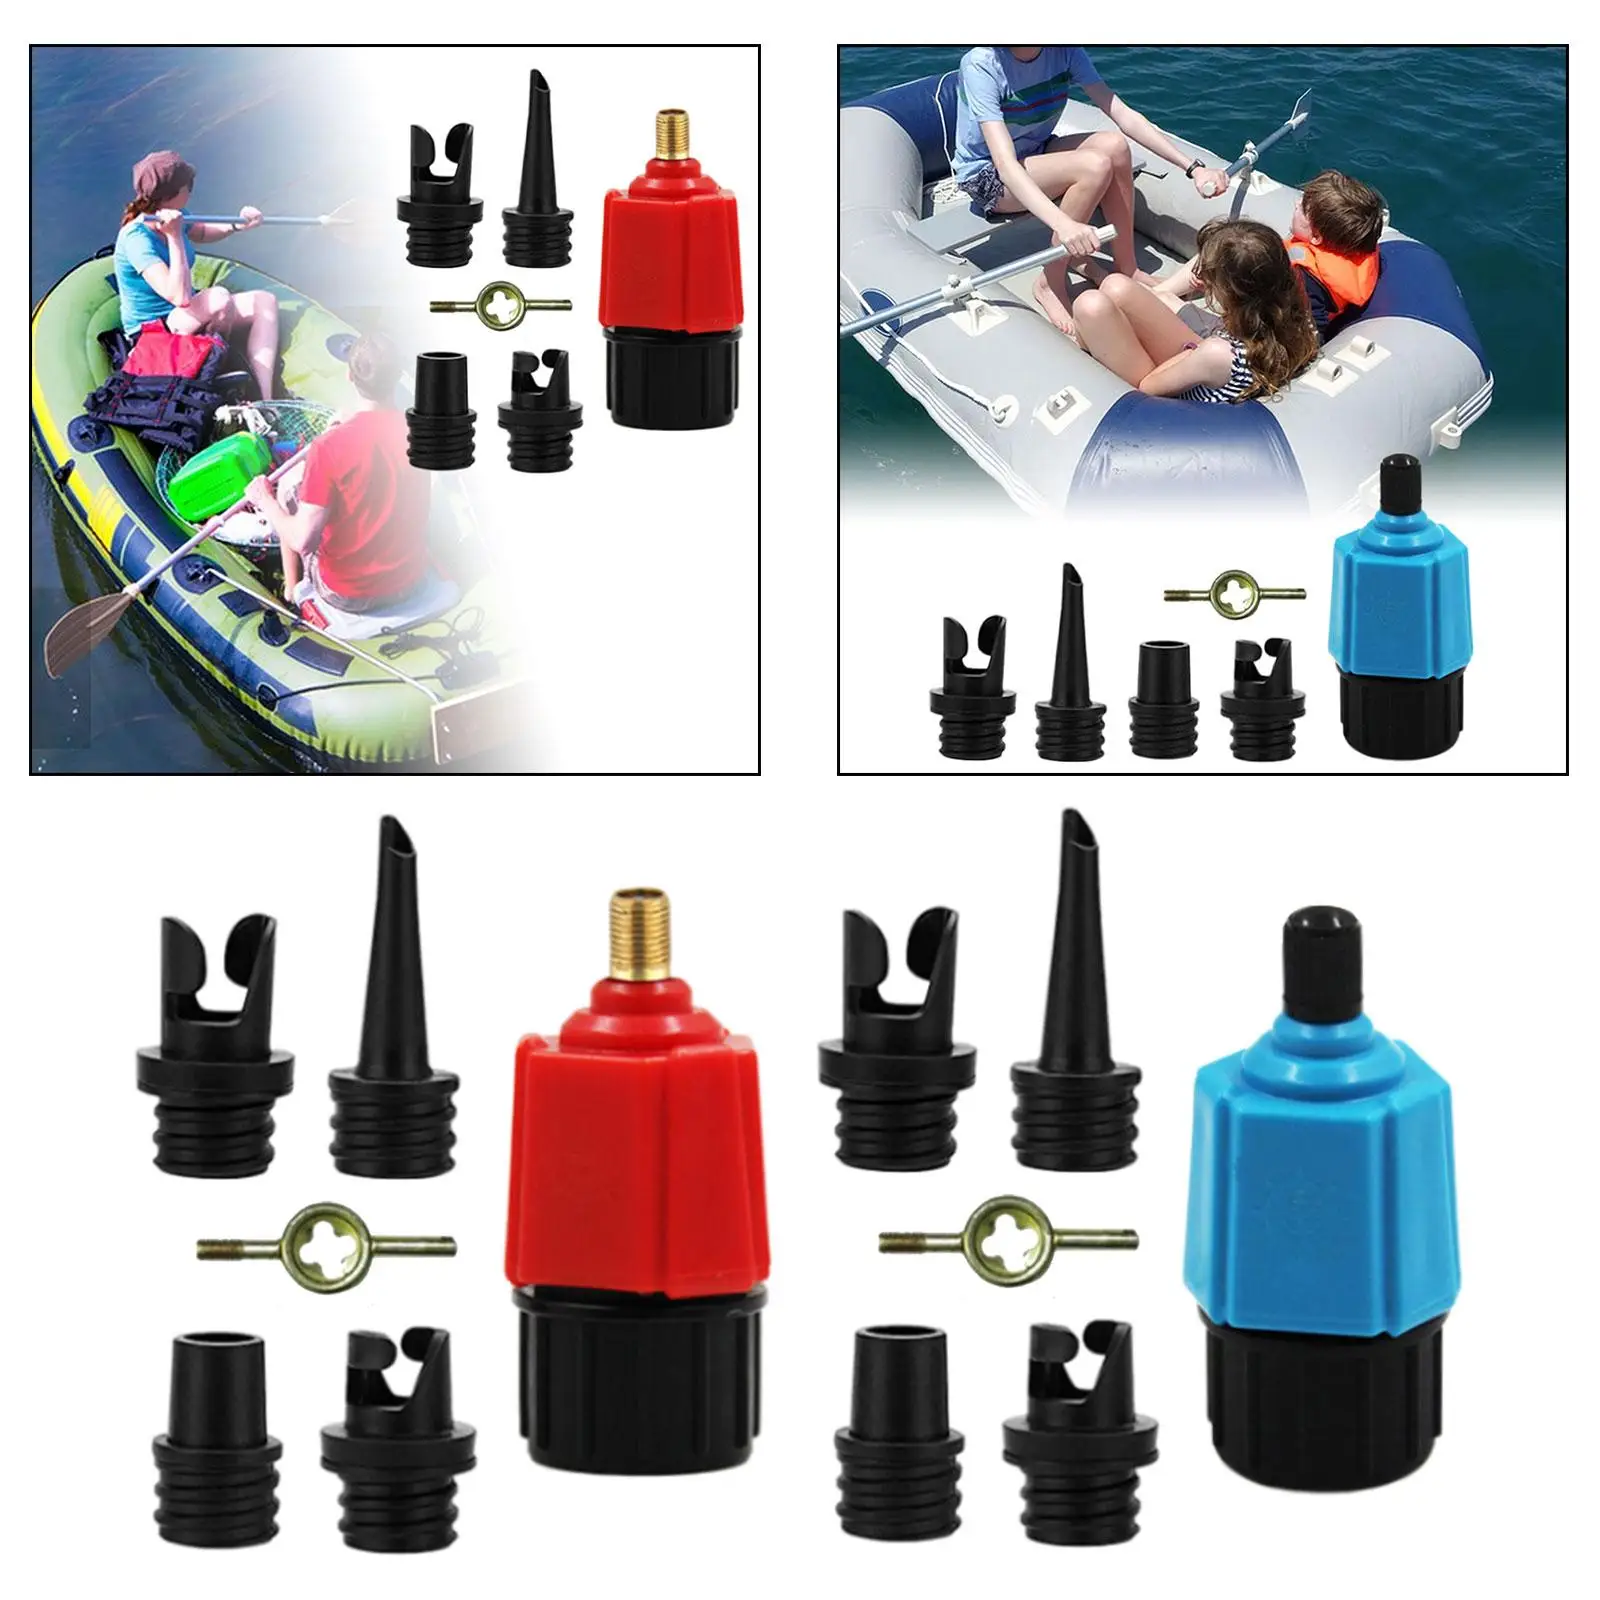 5 Pieces Pump Adaptor Inflatable Connector Replacement Boat Pump Adaptor